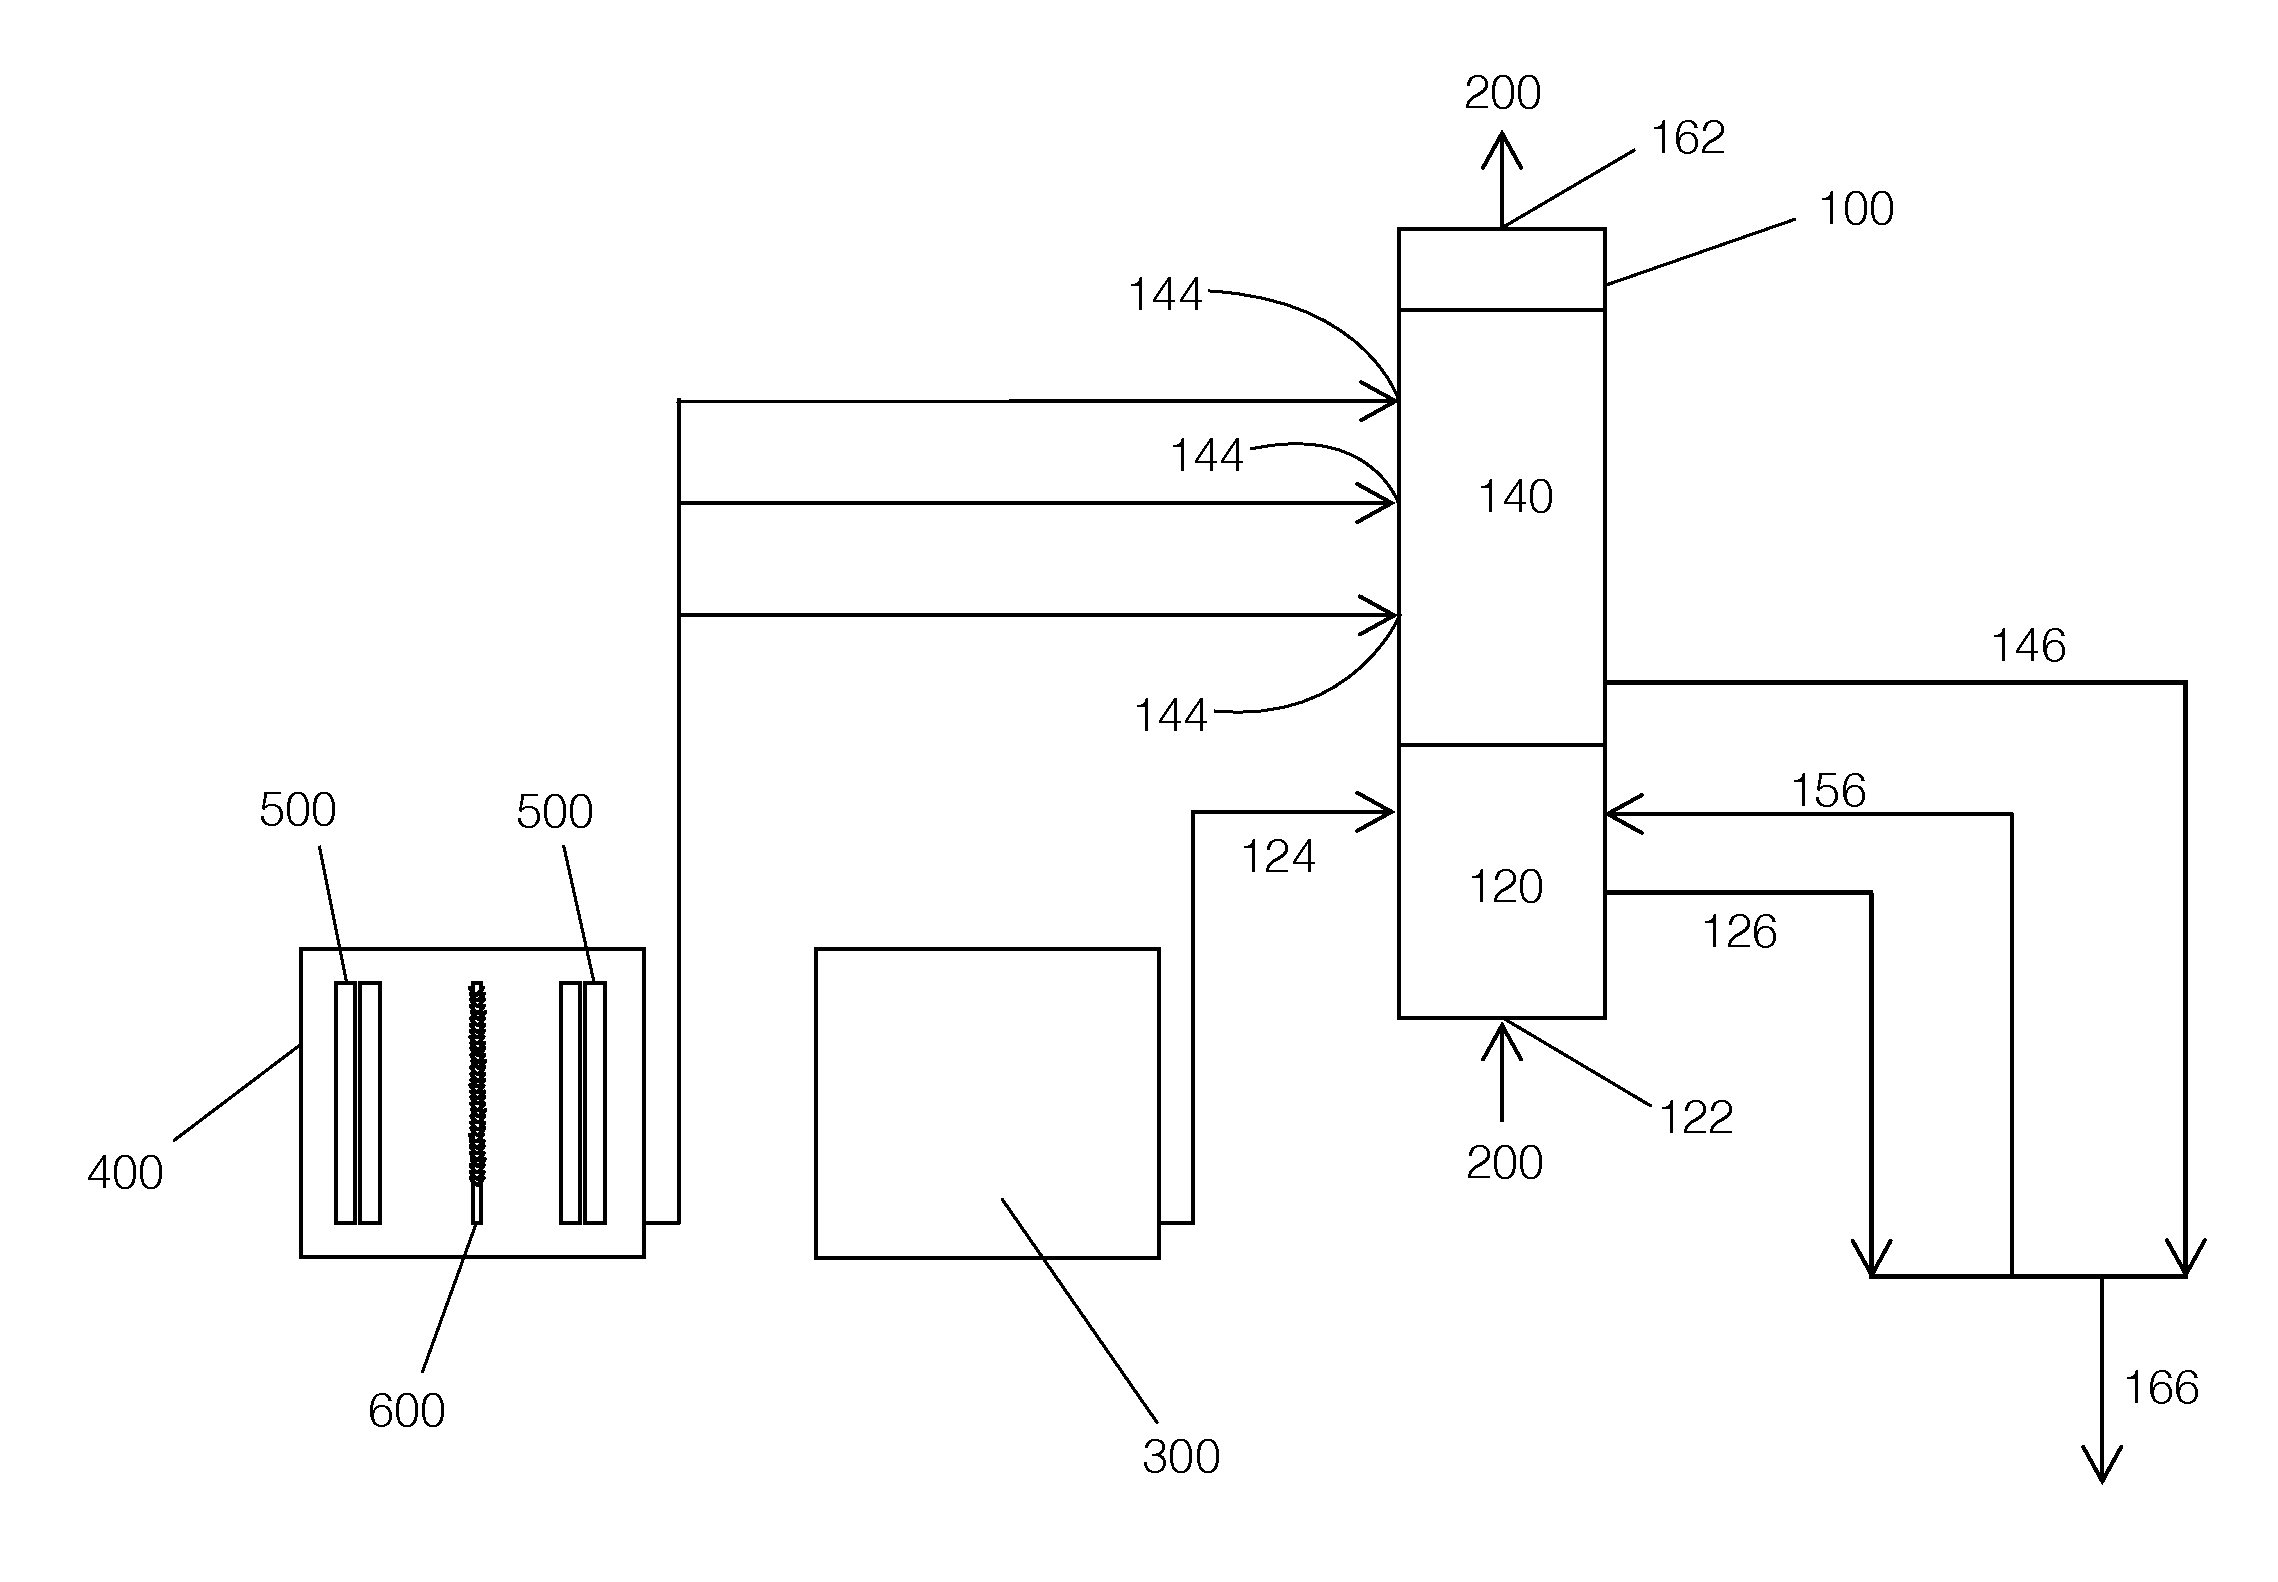 Method And System For Removing Pollutants And Greenhouse Gases From A Flue Gas